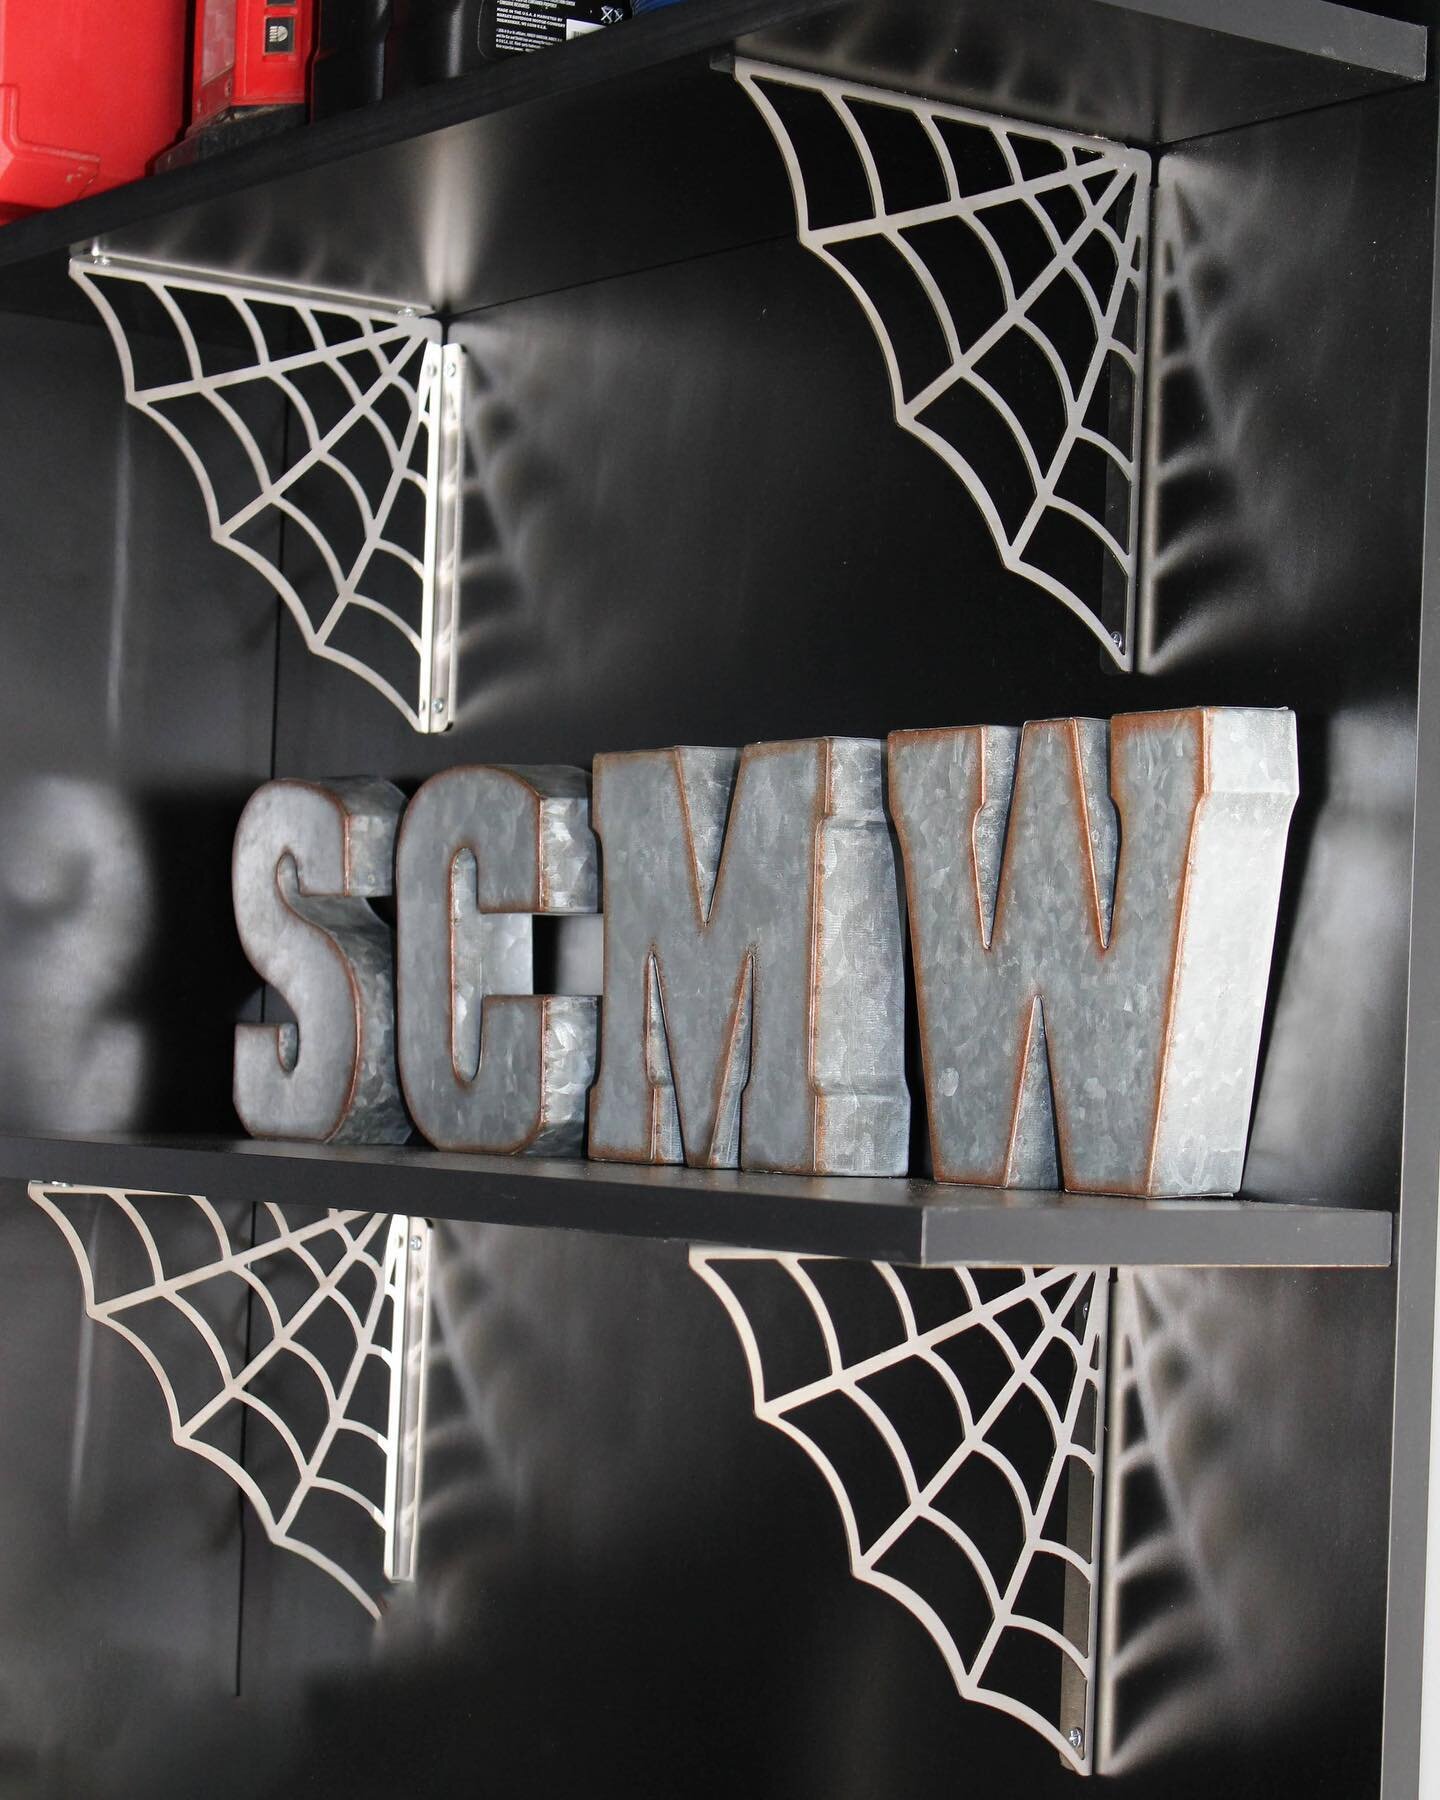 You still have time to get your spiderweb shelf brackets on Amazon before Halloween! Link is in our bio #Halloween #halloweendecorations🎃